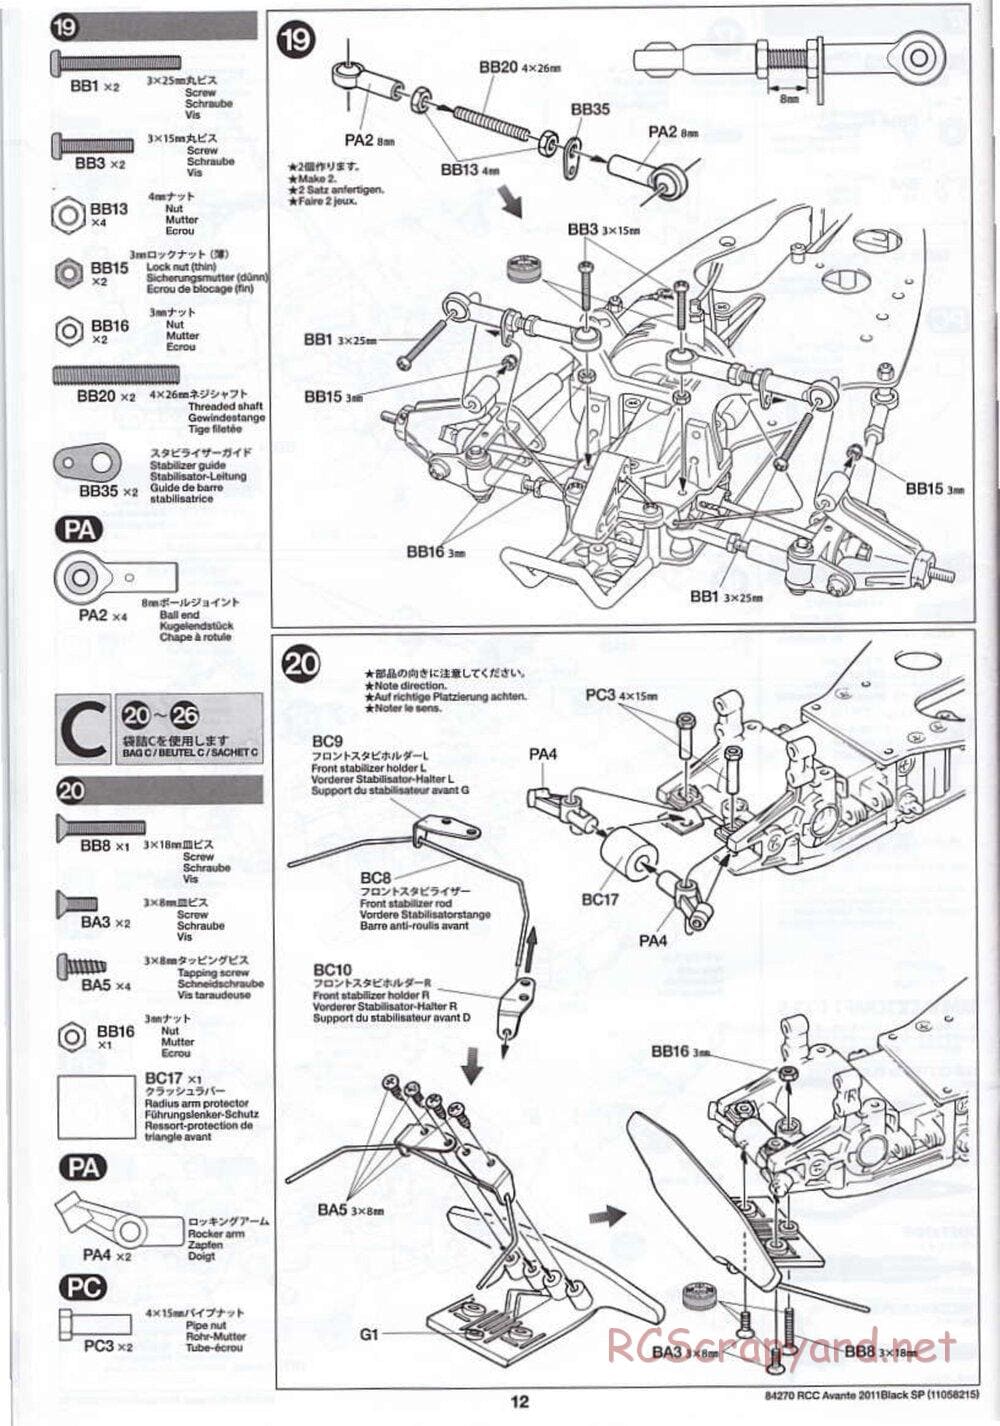 Tamiya - Avante 2011 - Black Special Chassis - Manual - Page 12